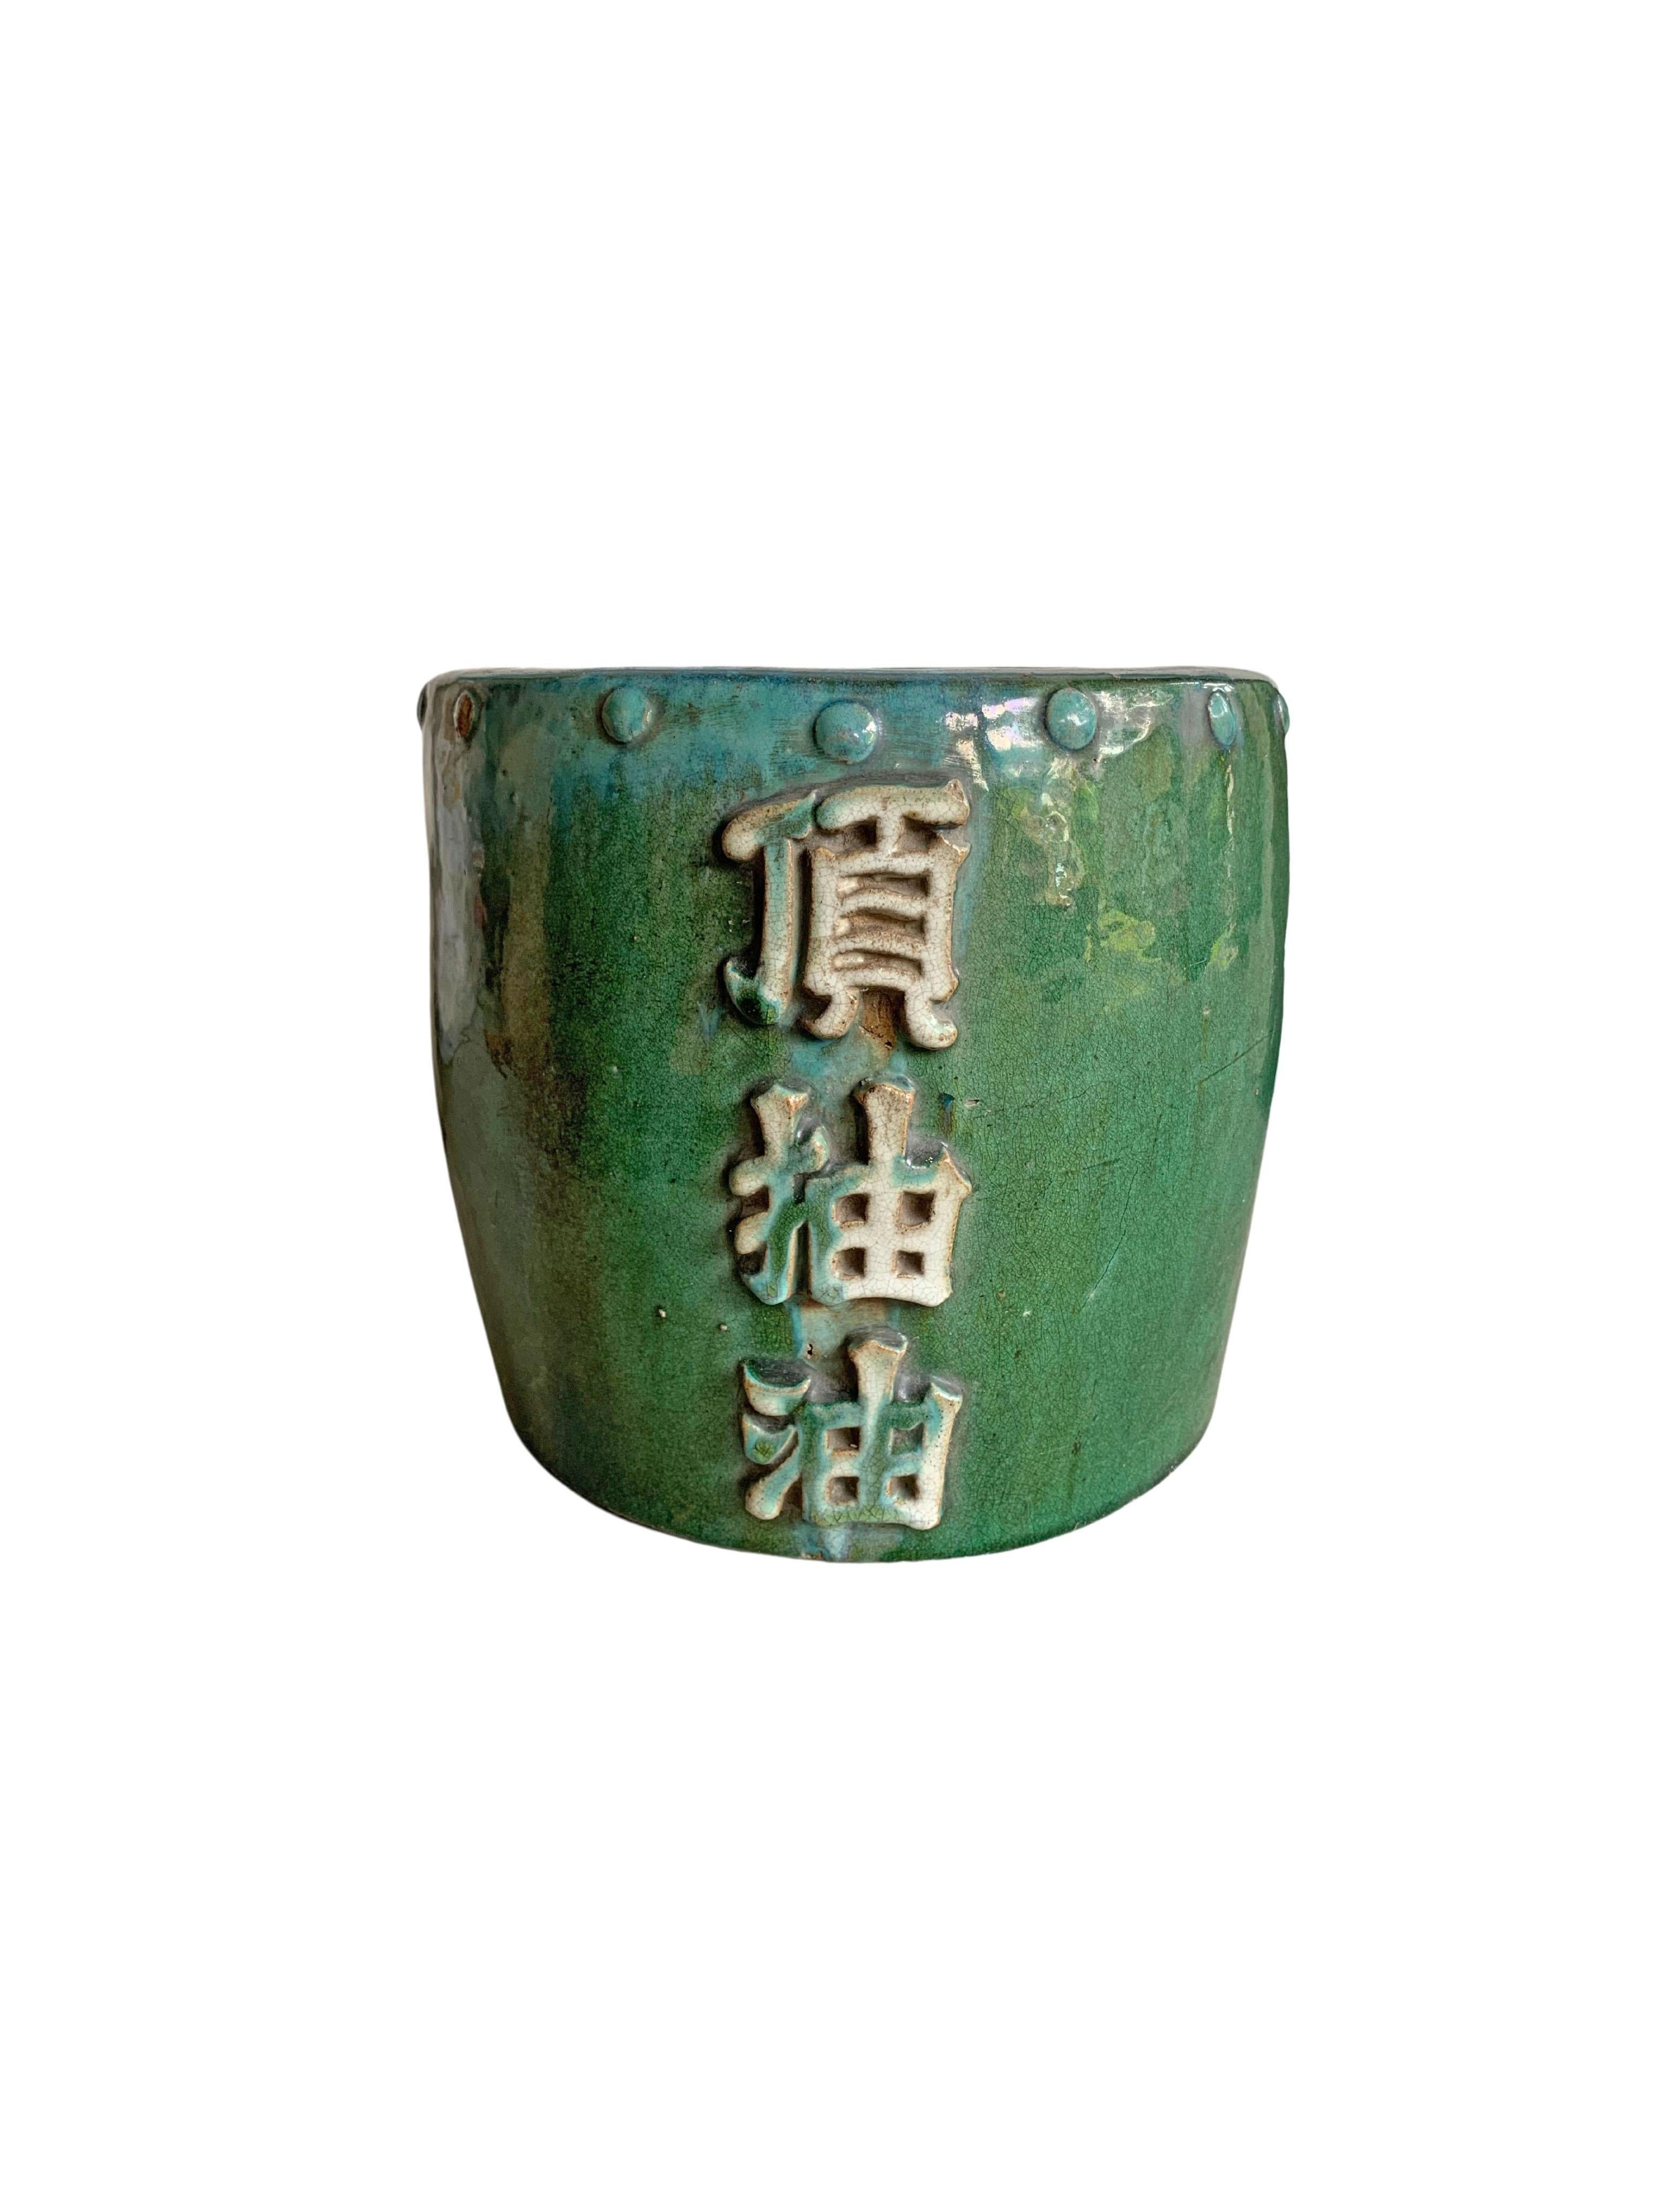 A wonderful green glaze adorns this mid-20th century Chinese ceramic oil storage jar. The characters on its front side translate to 